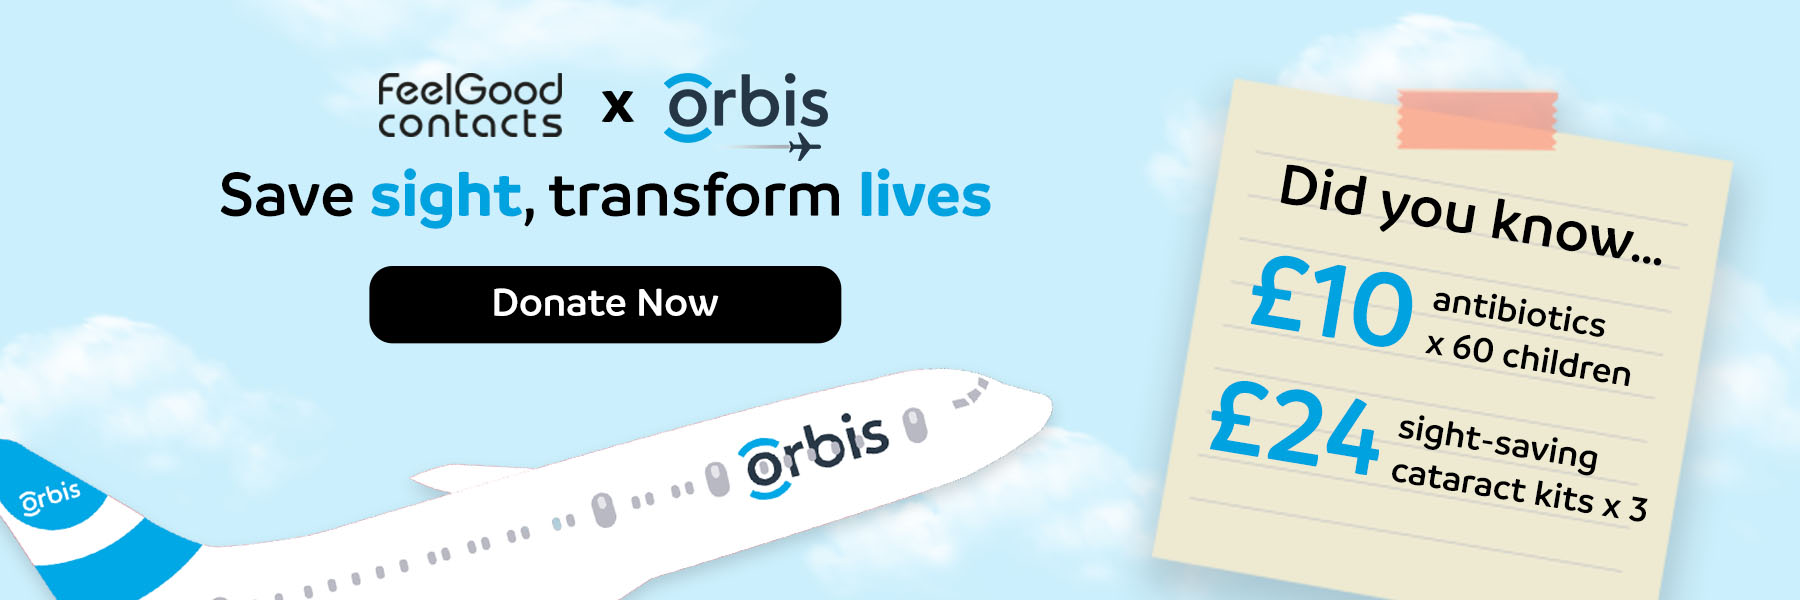 Feel Good Contacts supporting Orbis